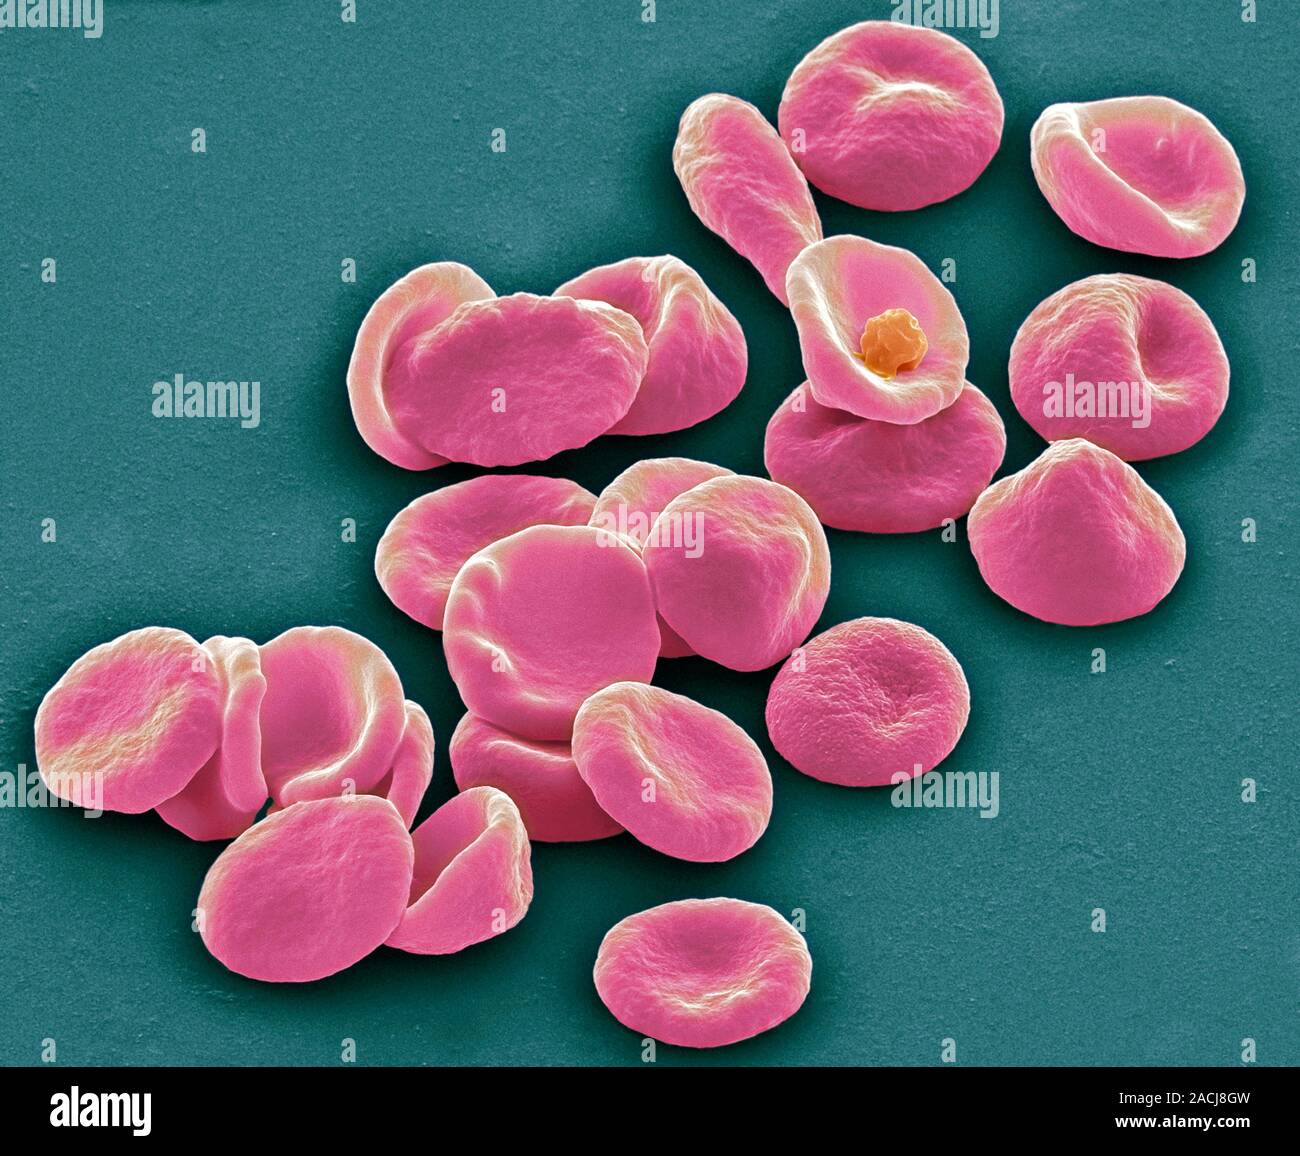 Red blood cells. Coloured scanning electron micrograph (SEM) of human ...